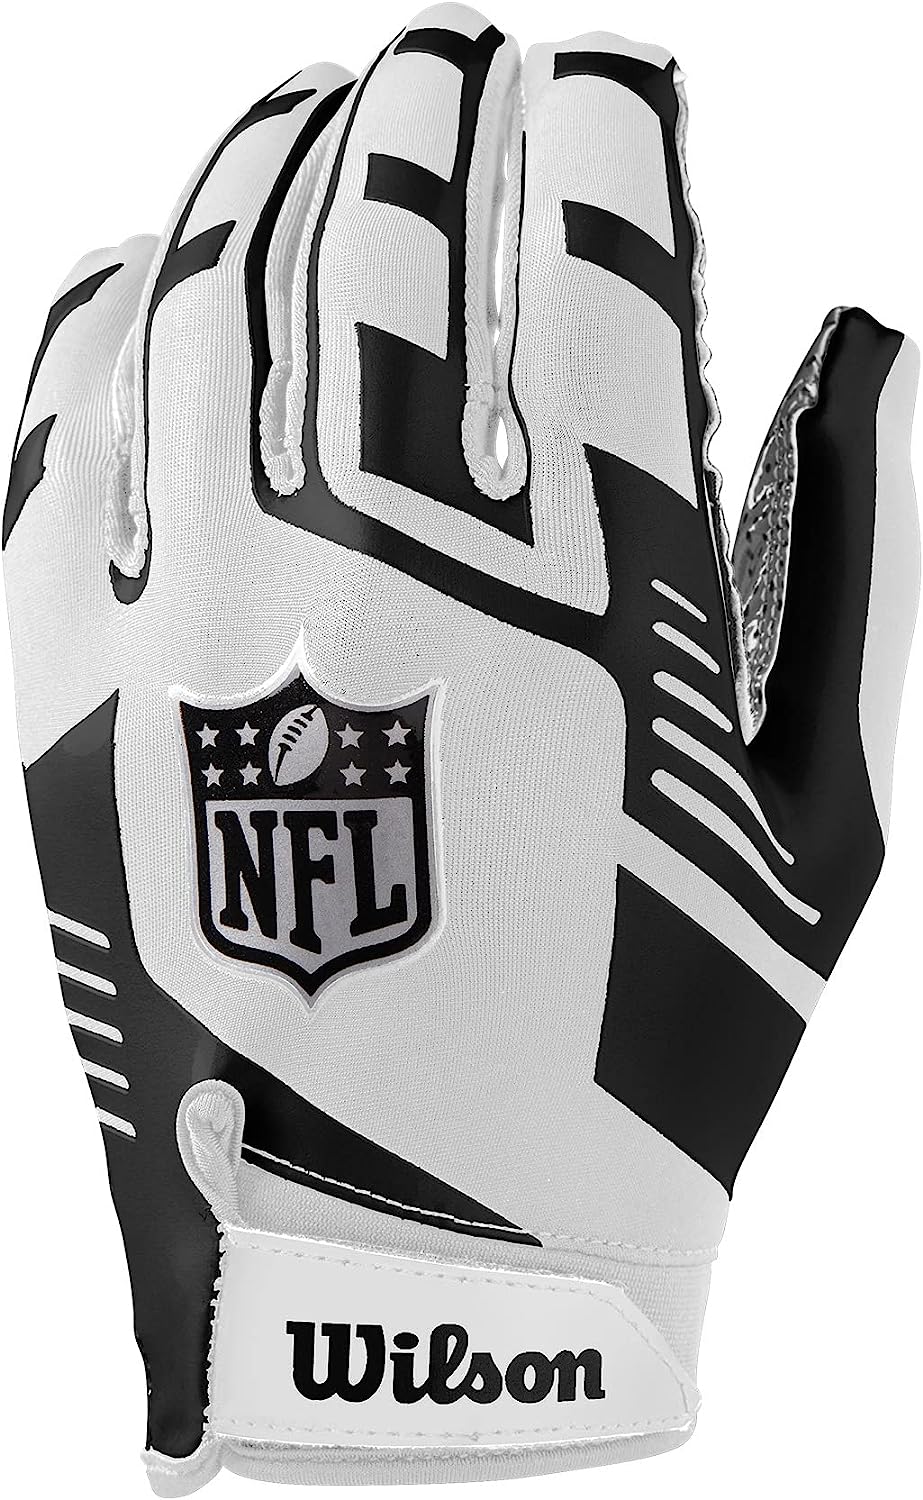 Wilson NFL Stretch Fit Receivers Glove - Adult Size, White/Black, 2 Pack